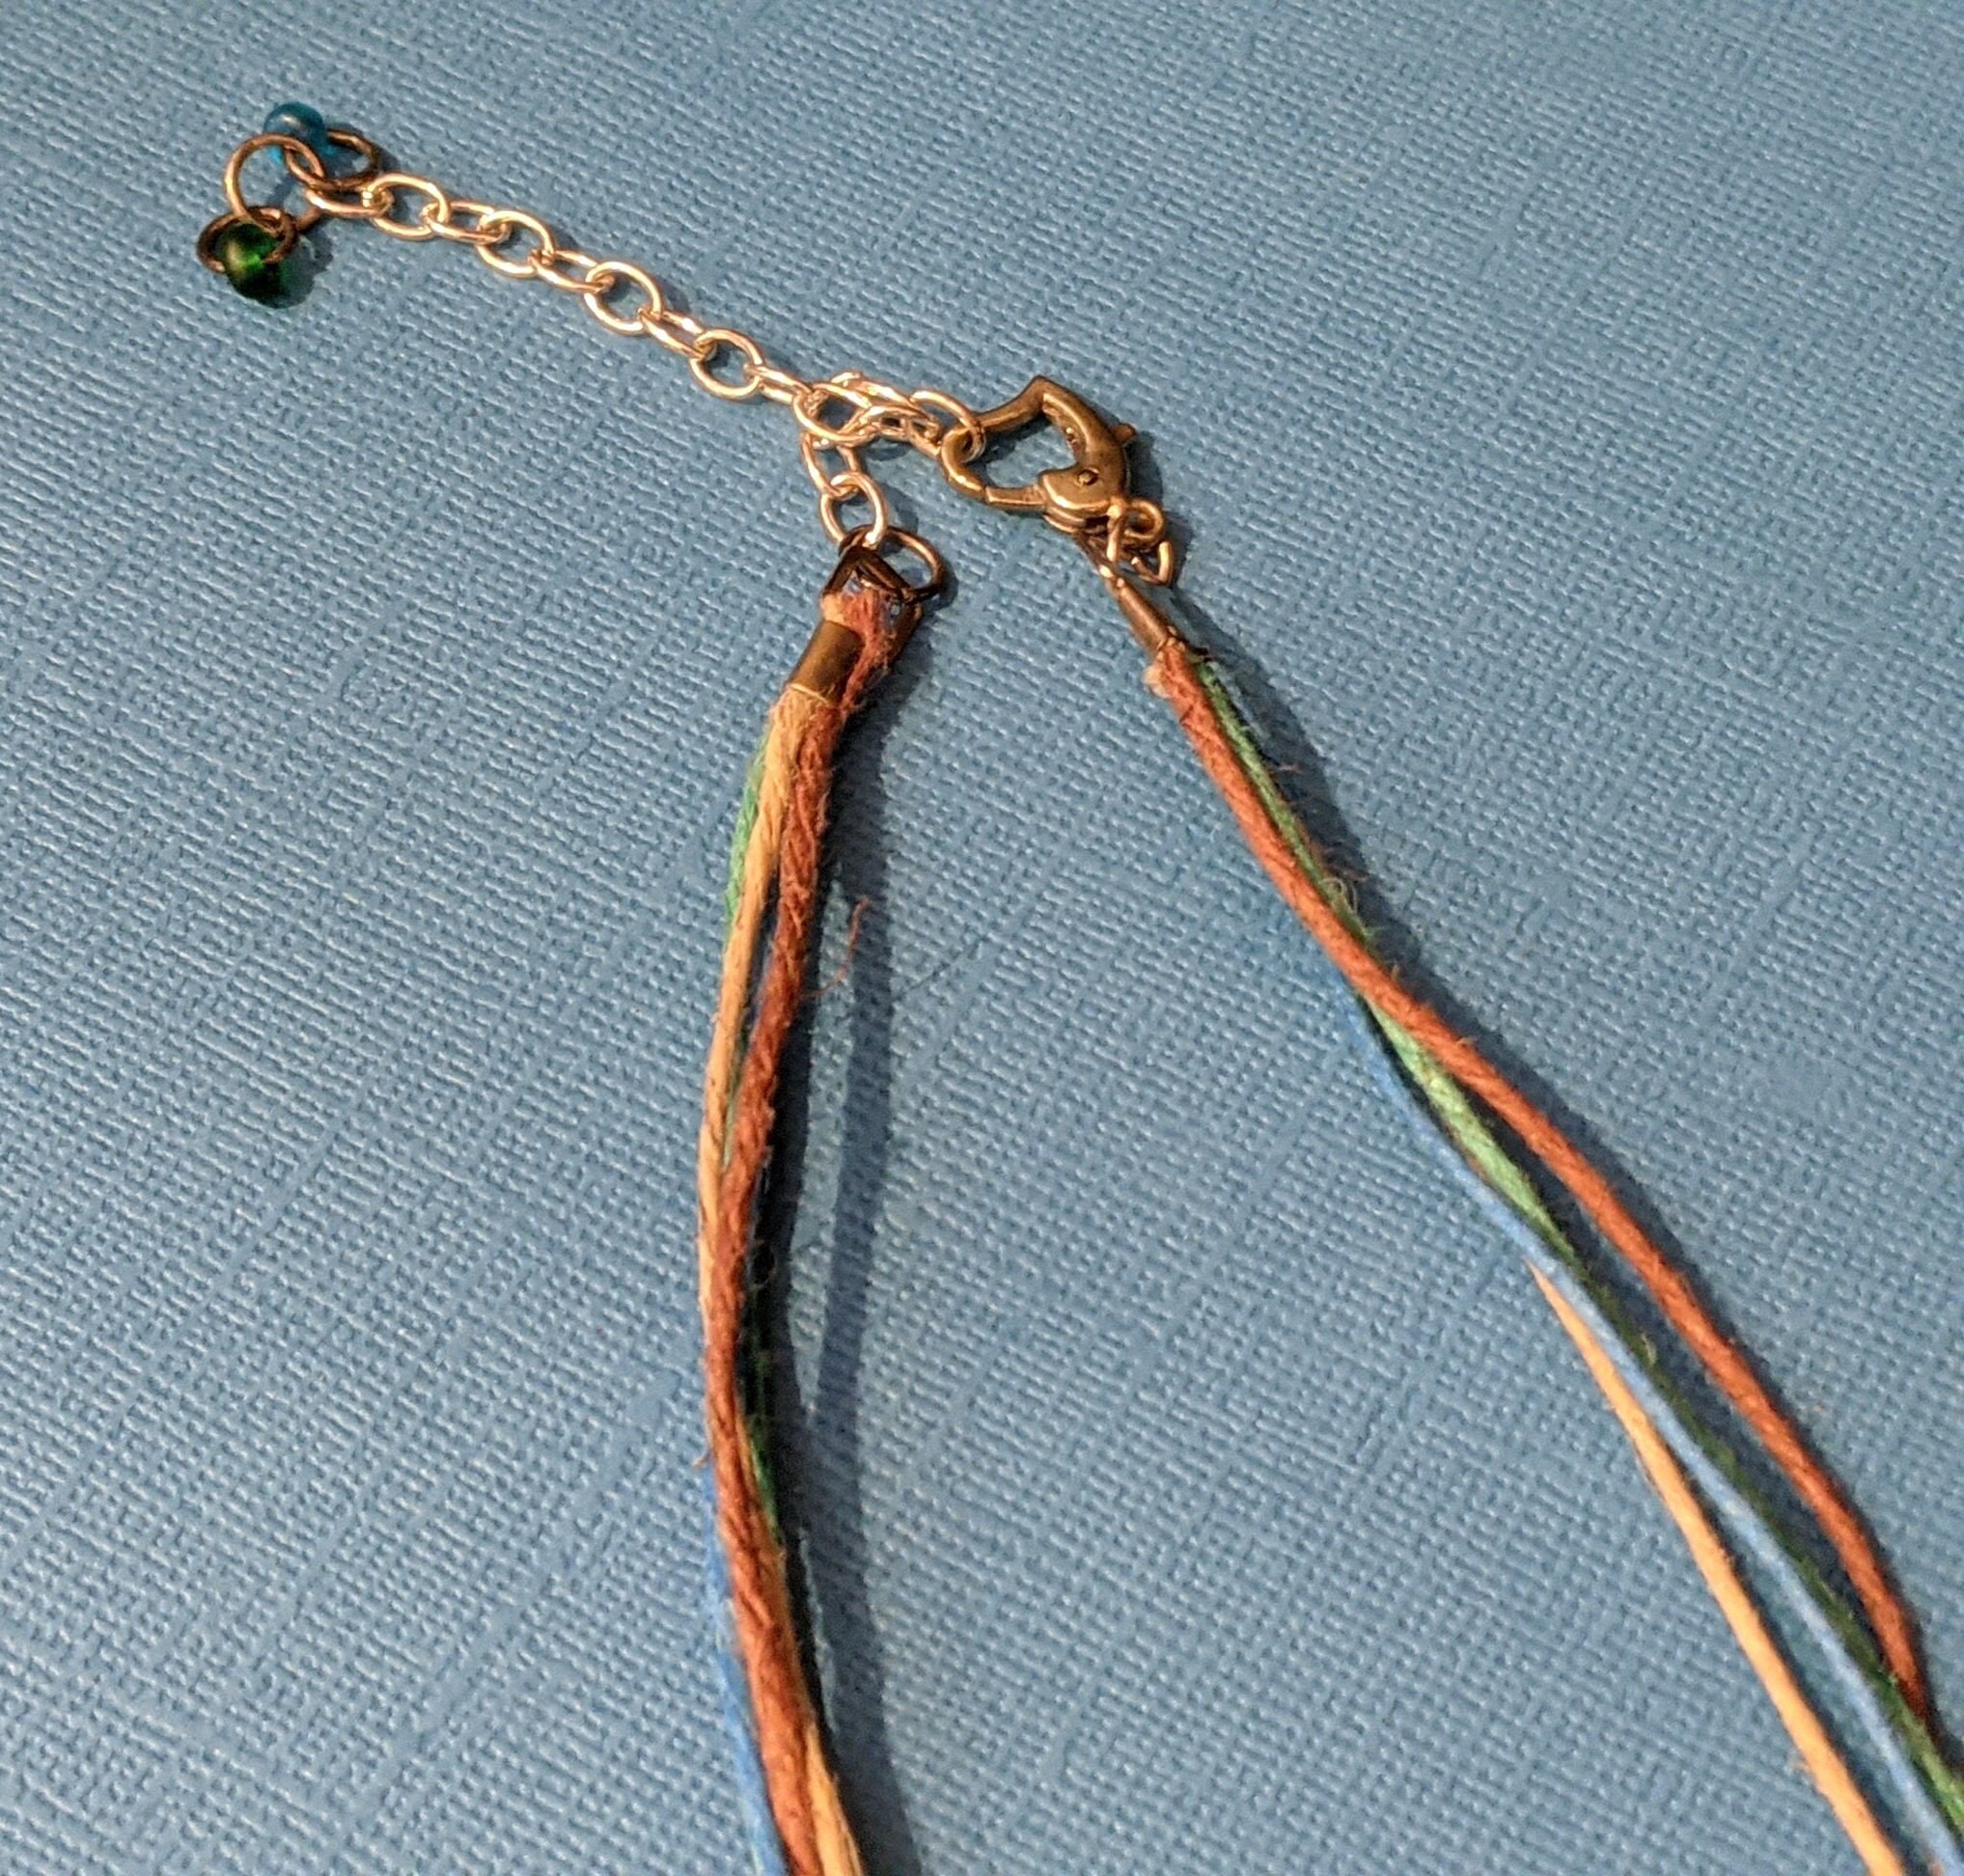 Necklace mix, bone / leather / wood / hemp (dyed), mixed colors, 5-inch  dangle with mixed shape pendant and accent beads, 28 inches hemp cord with  bone and cord button-style clasp. Sold